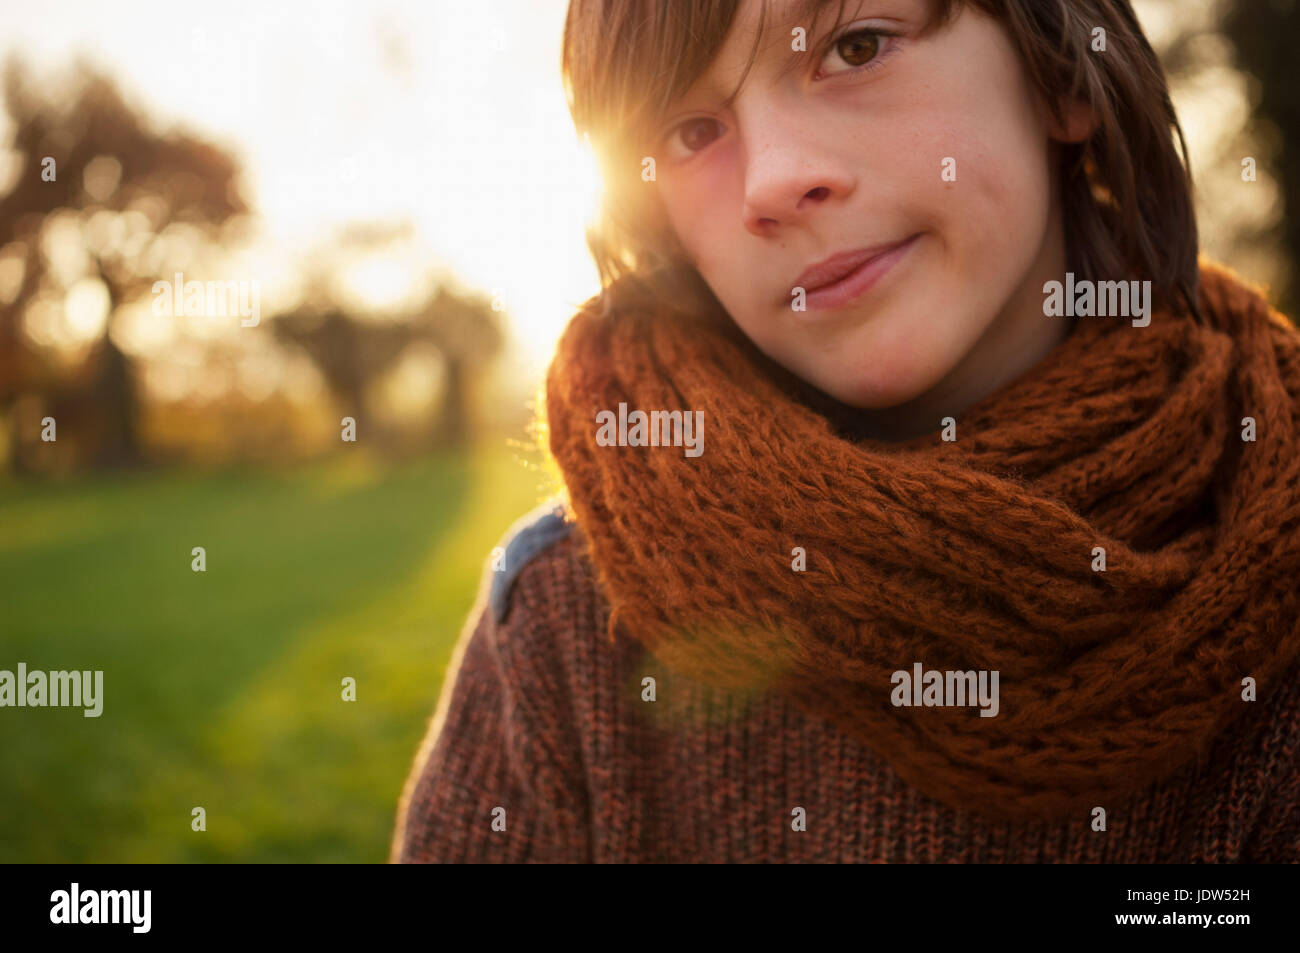 Boy in scarf in countryside, portrait Stock Photo